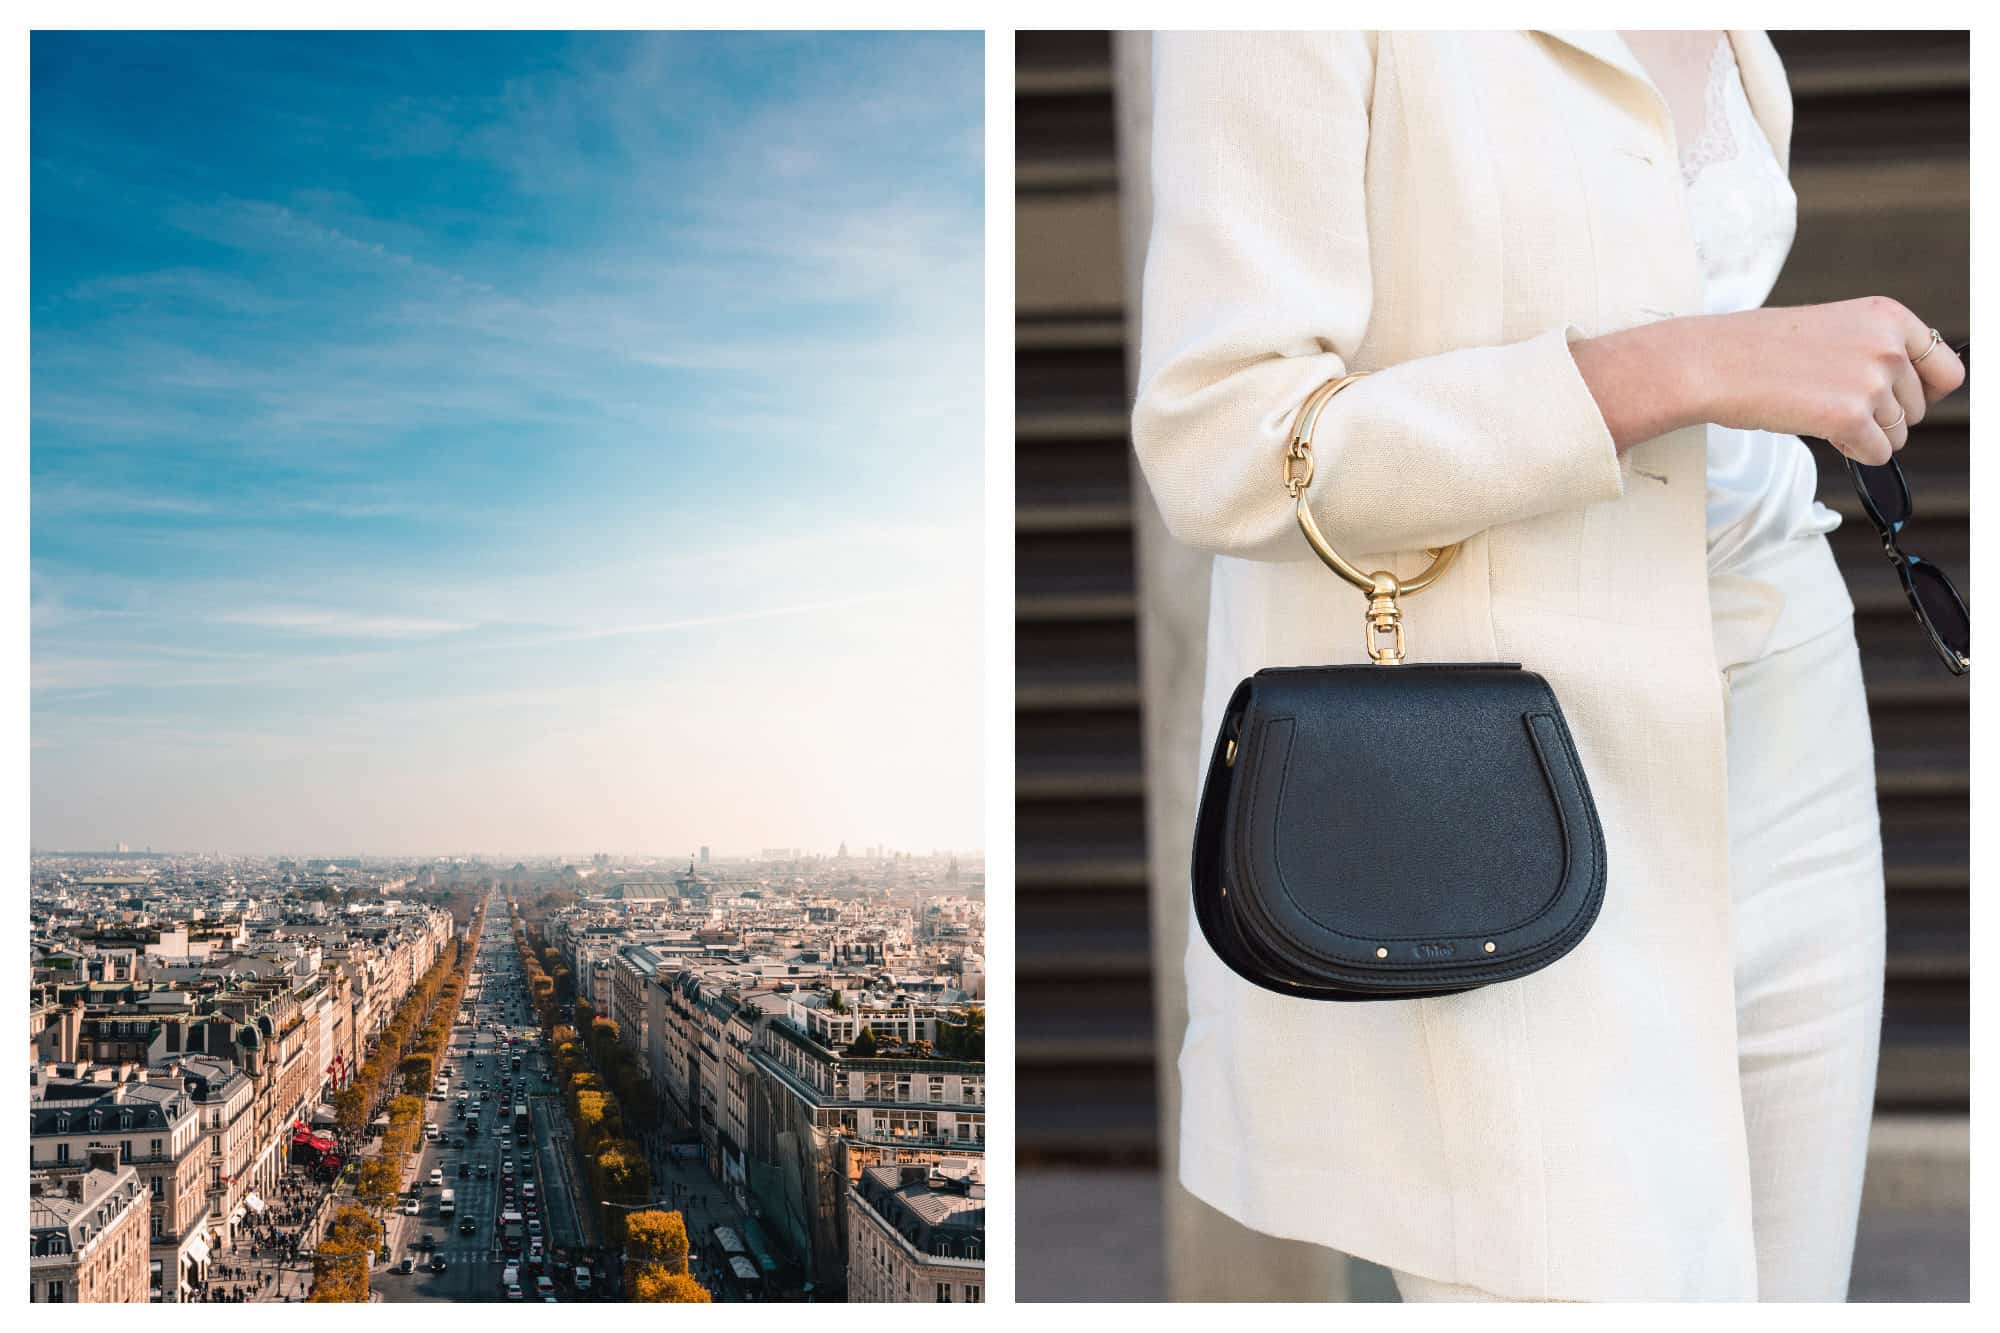 The view of the Champs Elysées in Paris against a blue sky (right). Where to shop for the right handbag in Paris like this smart black leather piece (right).